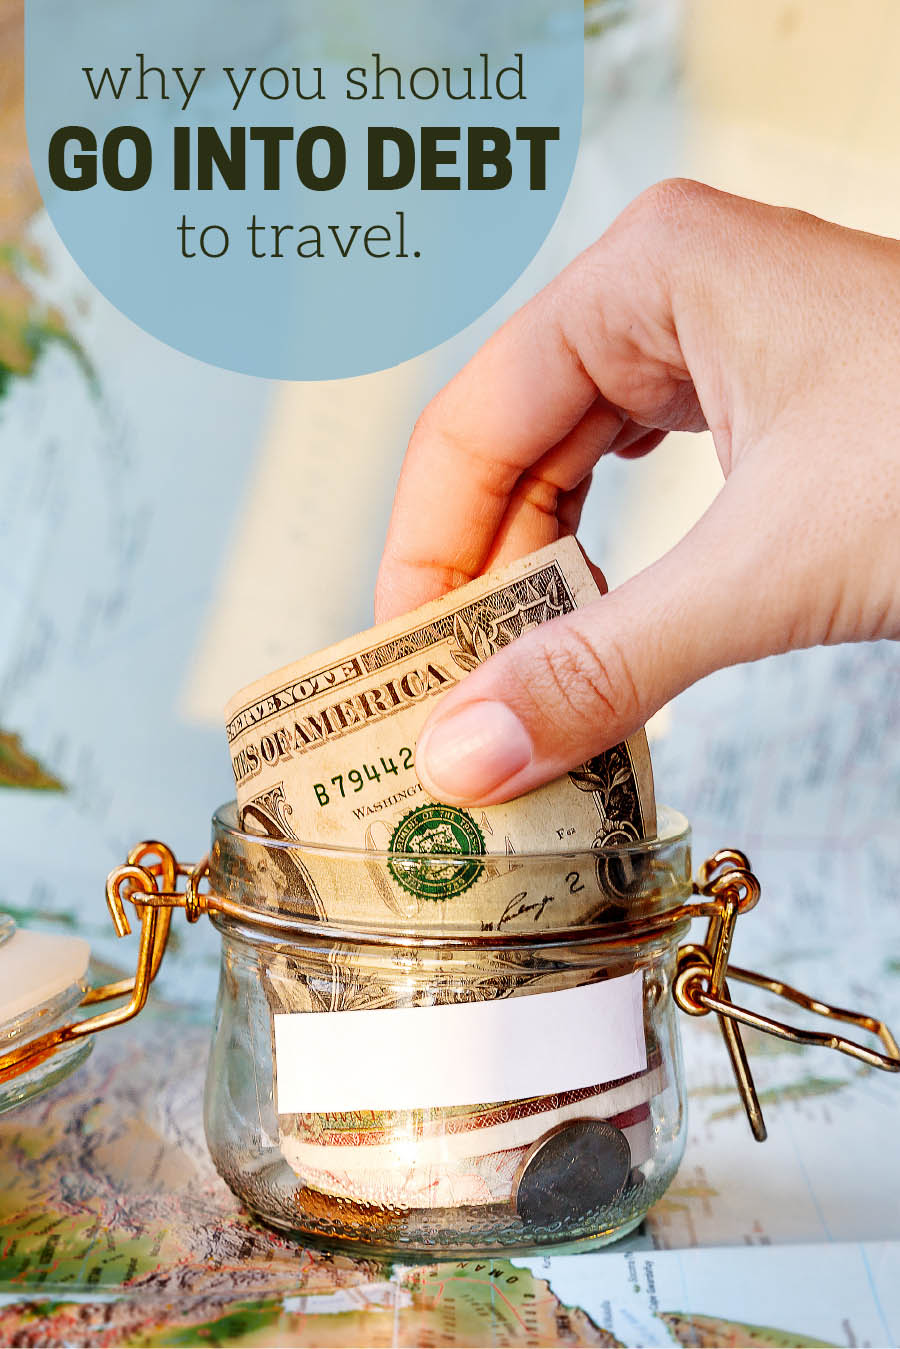 Why you should go into debt to travel